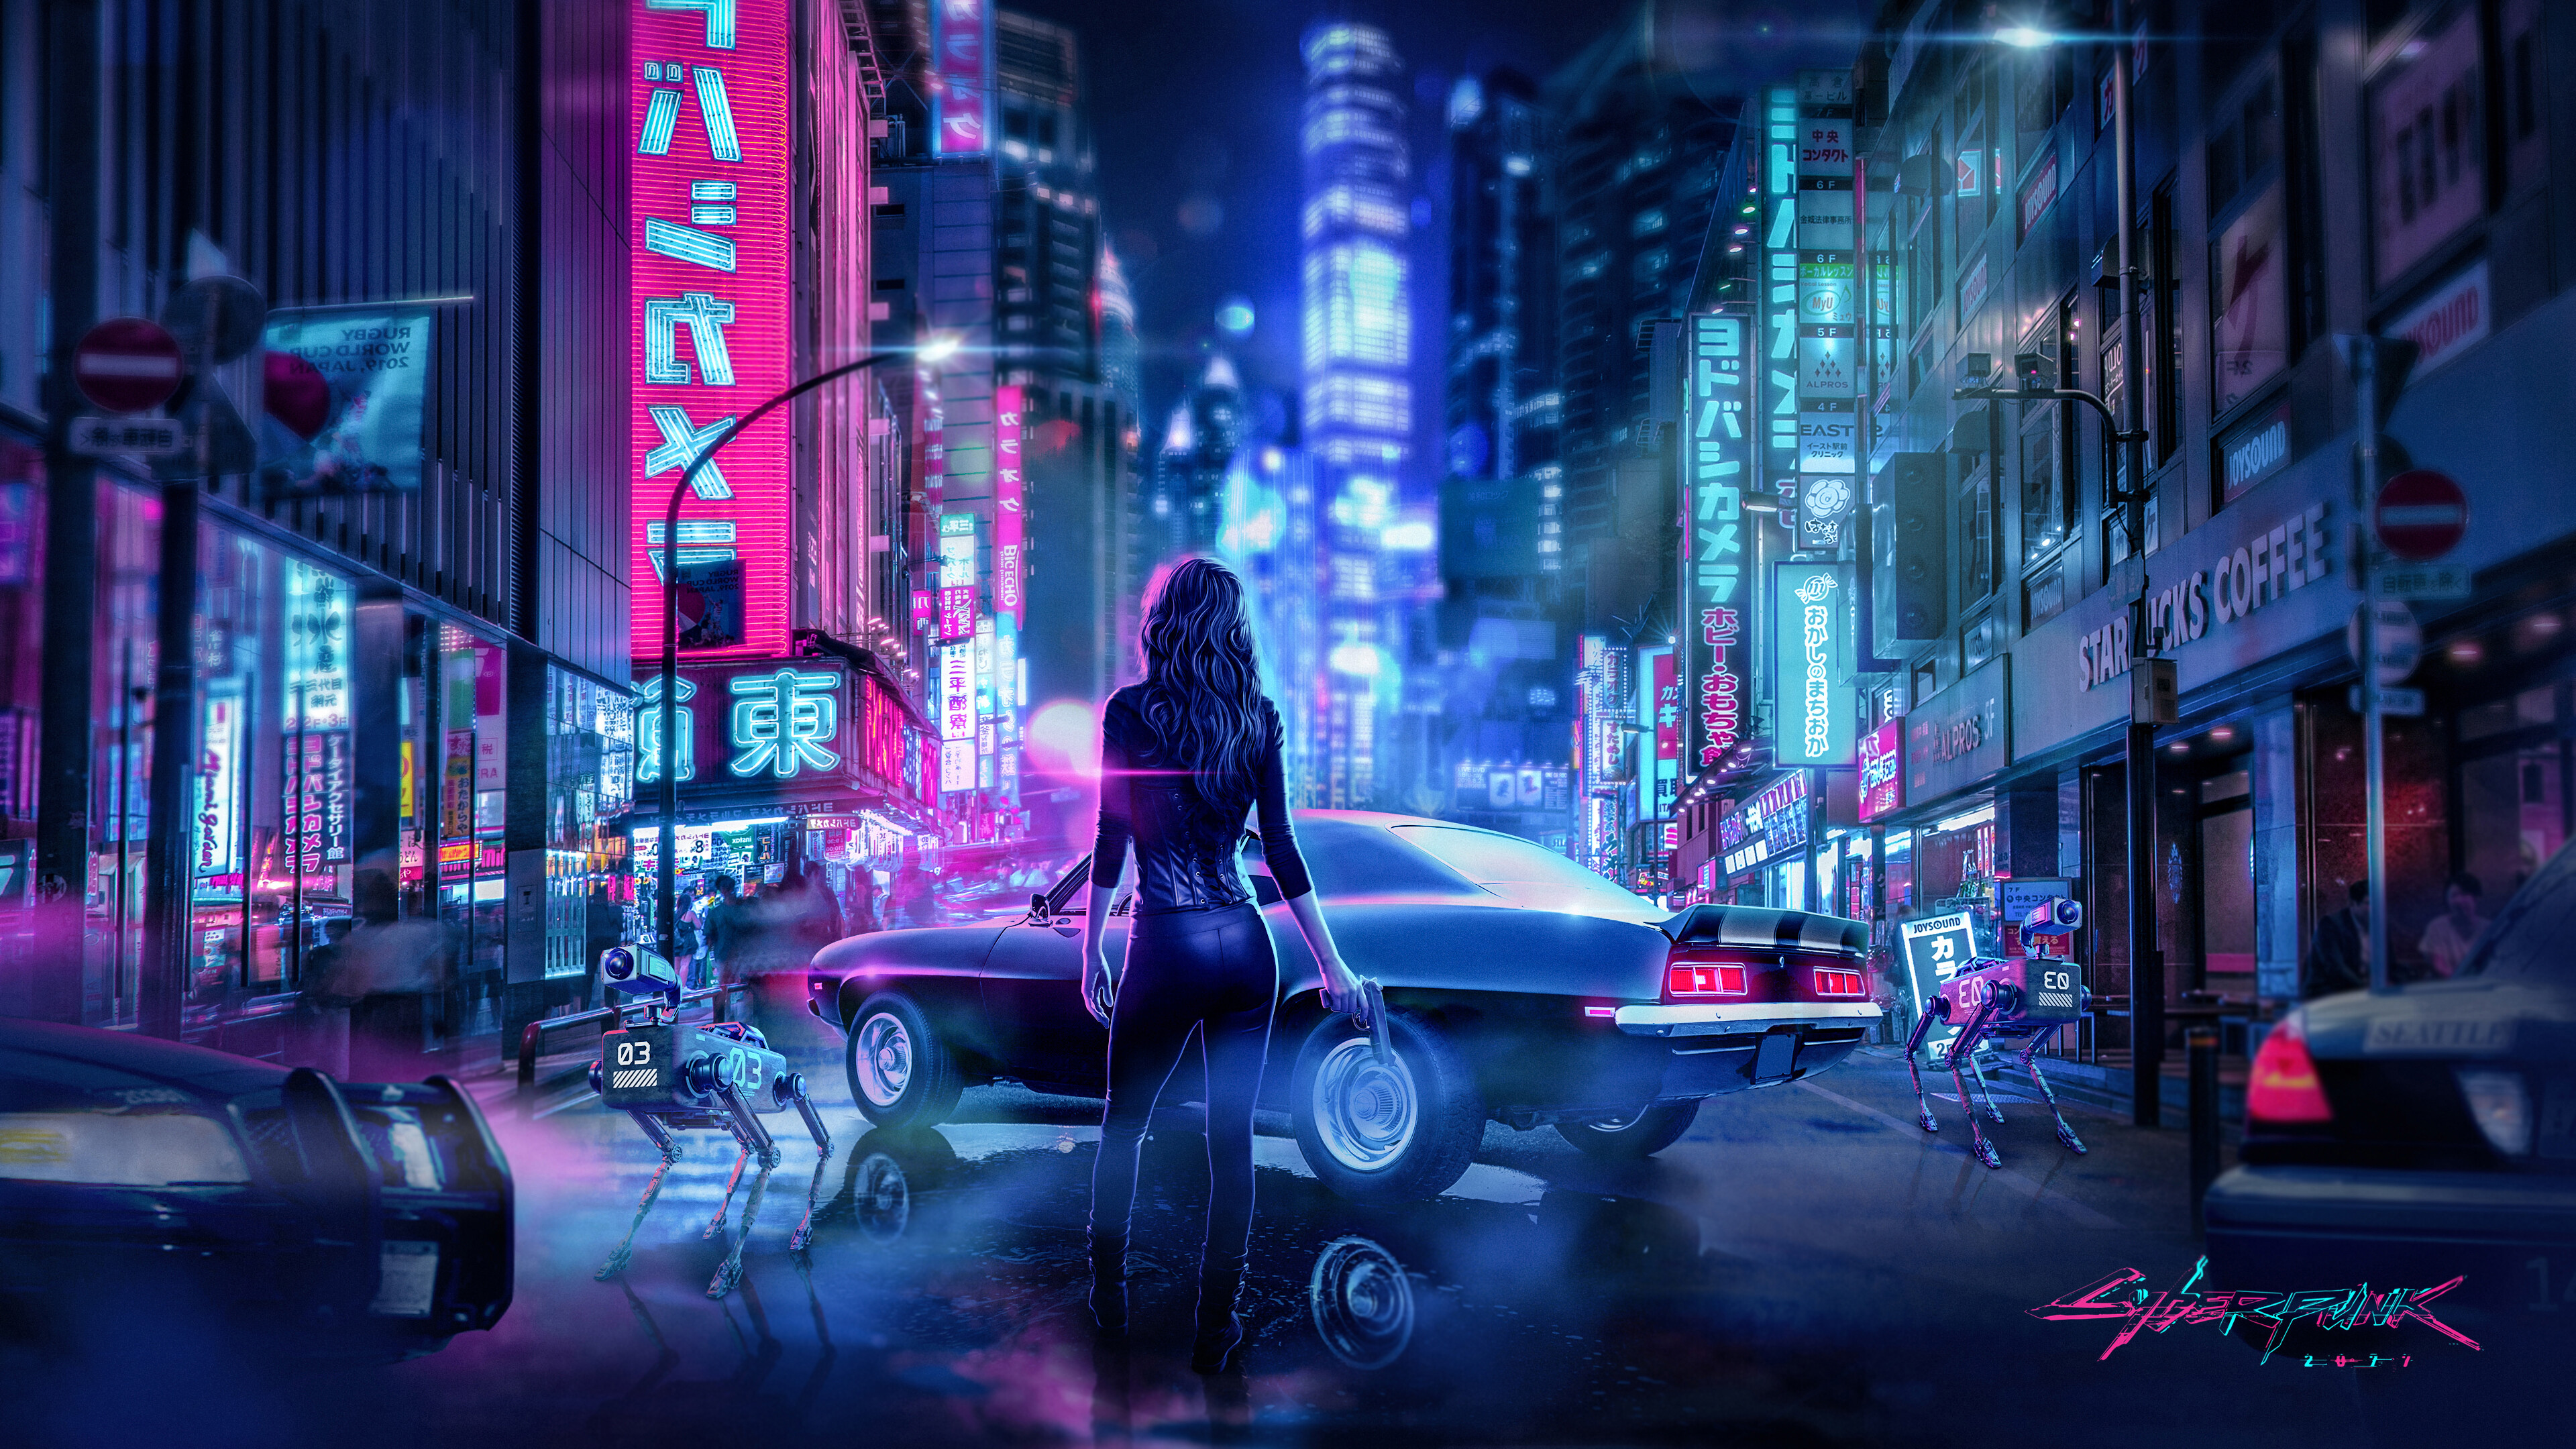 Cyberpunk 2077: Published by CD Projekt, Action game. 3840x2160 4K Background.